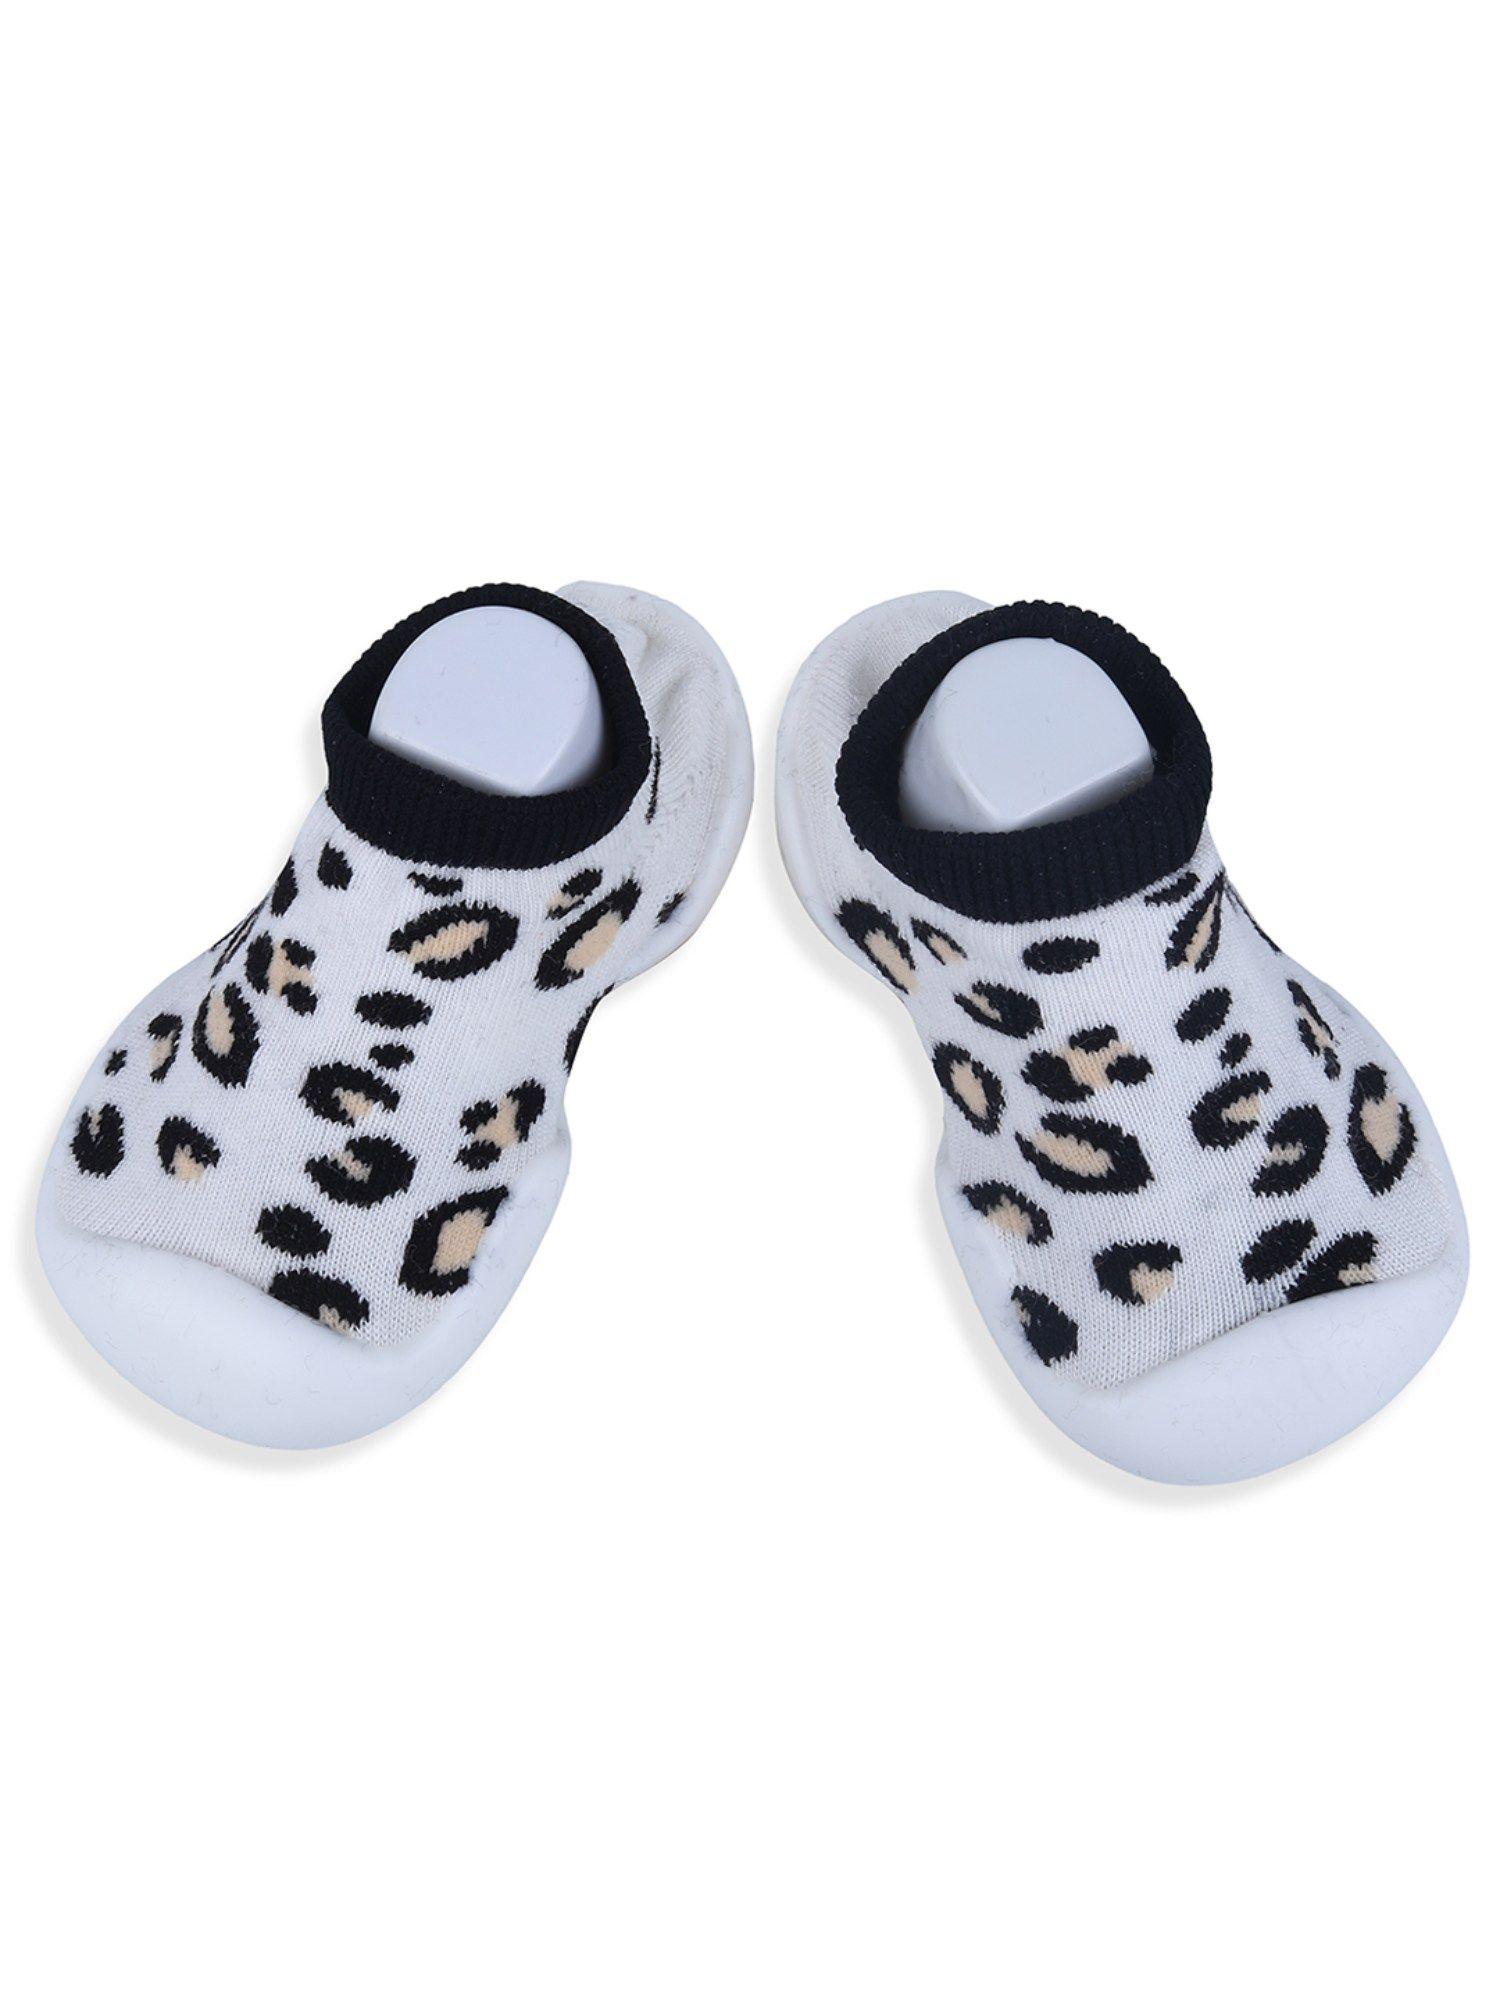 leopard-print-rubber-comfortable-sole-slip-on-sock-shoes---white